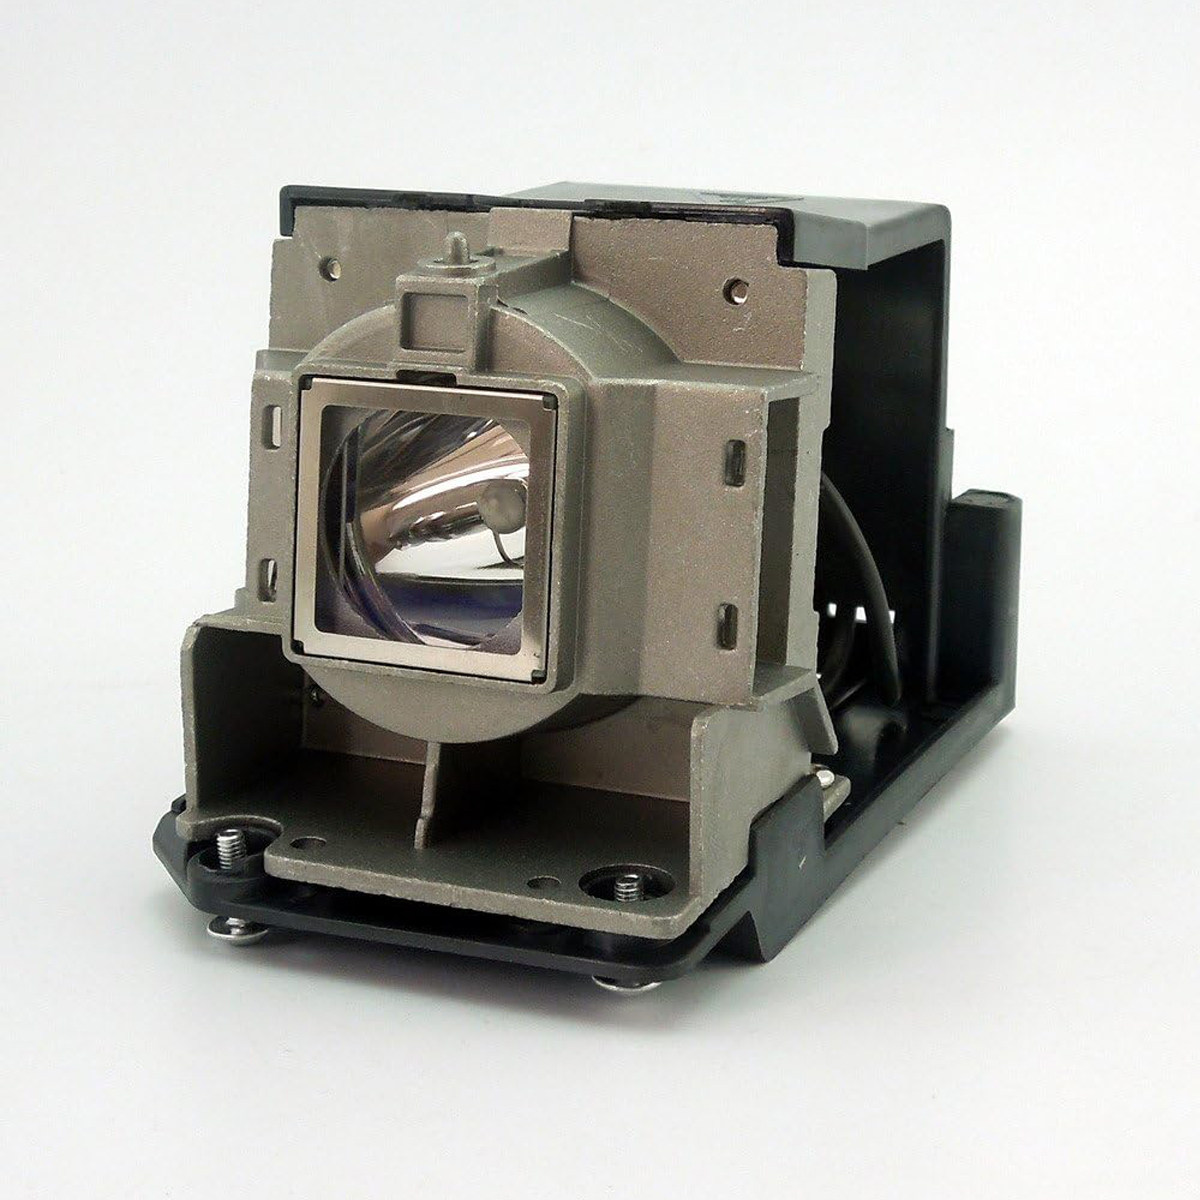 Replacement Projector lamp 01-00247/75016600 For 2000i DVX 3000i DVX